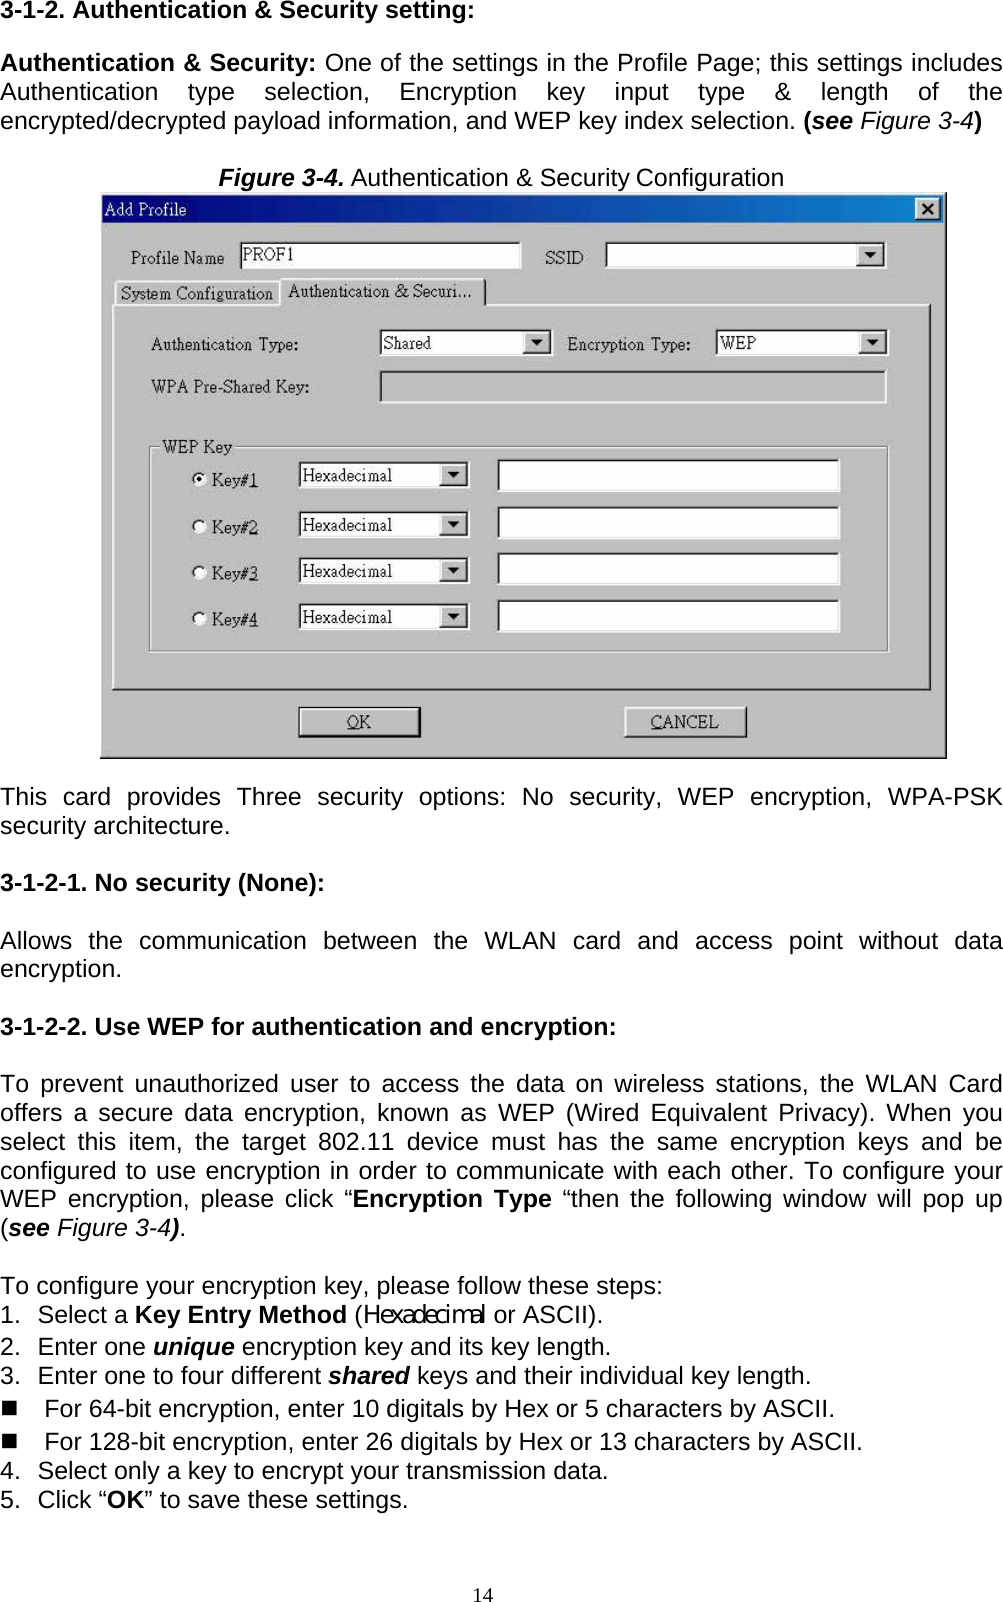 14   3-1-2. Authentication &amp; Security setting:  Authentication &amp; Security: One of the settings in the Profile Page; this settings includes Authentication type selection, Encryption key input type &amp; length of the encrypted/decrypted payload information, and WEP key index selection. (see Figure 3-4)  Figure 3-4. Authentication &amp; Security Configuration   This card provides Three security options: No security, WEP encryption, WPA-PSK security architecture.  3-1-2-1. No security (None):    Allows the communication between the WLAN card and access point without data encryption.  3-1-2-2. Use WEP for authentication and encryption:  To prevent unauthorized user to access the data on wireless stations, the WLAN Card offers a secure data encryption, known as WEP (Wired Equivalent Privacy). When you select this item, the target 802.11 device must has the same encryption keys and be configured to use encryption in order to communicate with each other. To configure your WEP encryption, please click “Encryption Type “then the following window will pop up (see Figure 3-4).  To configure your encryption key, please follow these steps: 1. Select a Key Entry Method (Hexadecimal or ASCII). 2. Enter one unique encryption key and its key length. 3.  Enter one to four different shared keys and their individual key length.     For 64-bit encryption, enter 10 digitals by Hex or 5 characters by ASCII.   For 128-bit encryption, enter 26 digitals by Hex or 13 characters by ASCII. 4.  Select only a key to encrypt your transmission data. 5. Click “OK” to save these settings.  